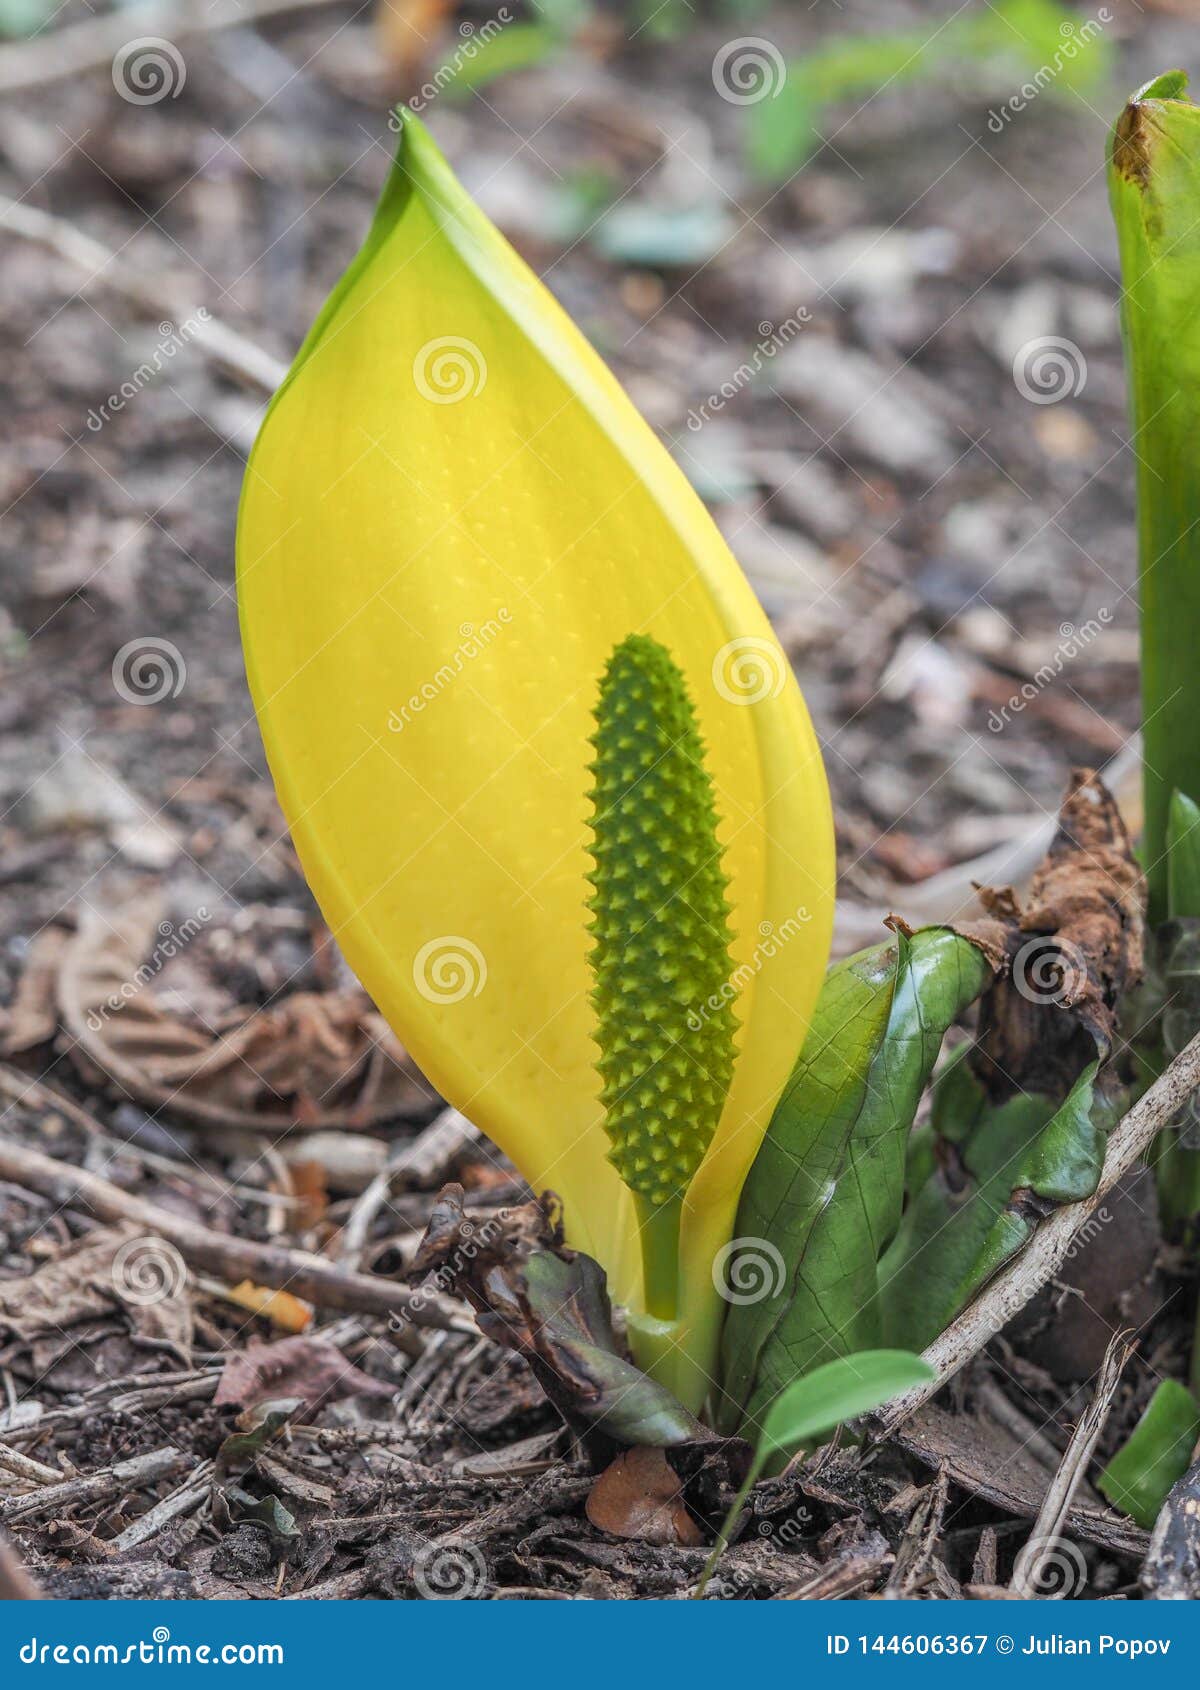 Lysichiton Americanus Growing Plant In The Swamp Western Skunk Cabbage Stock Image Image Of Flower Colorful 144606367